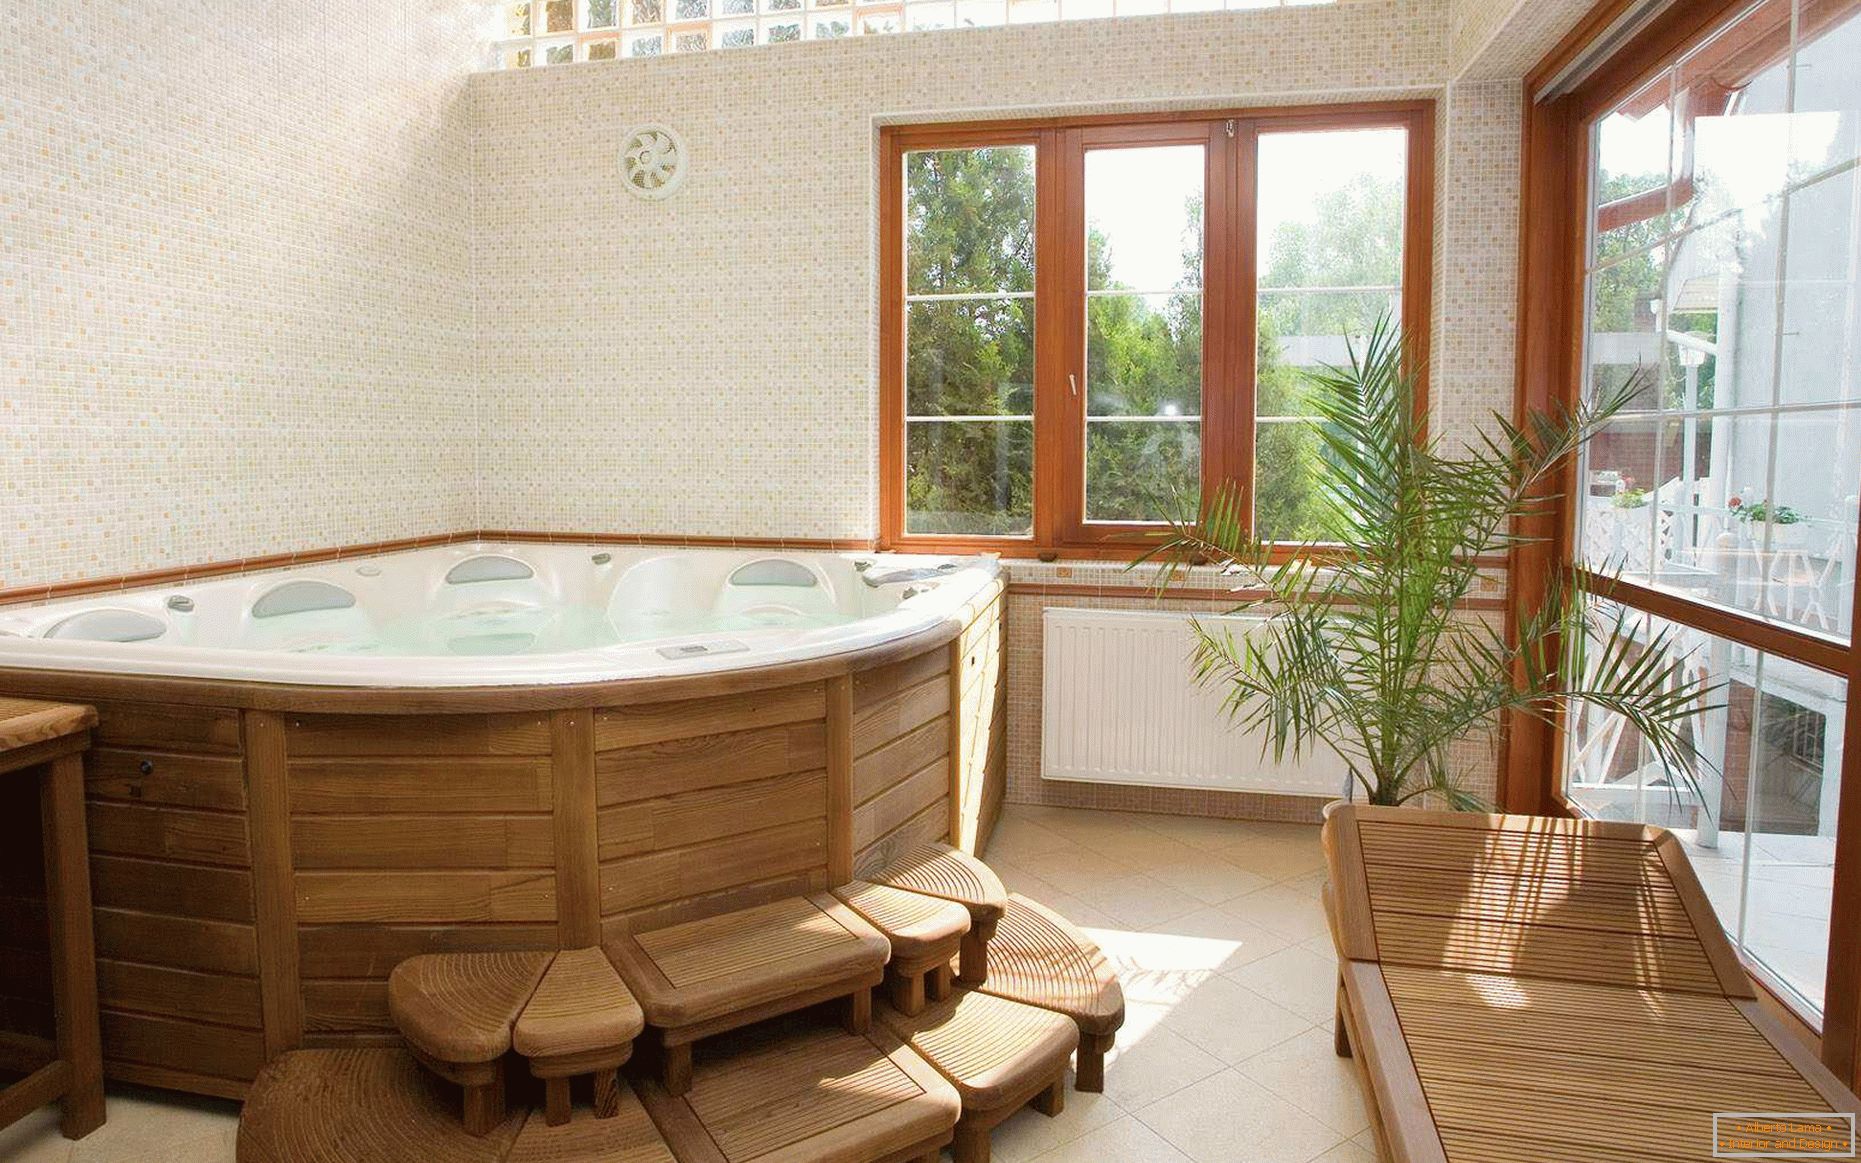 Jacuzzi in a private house